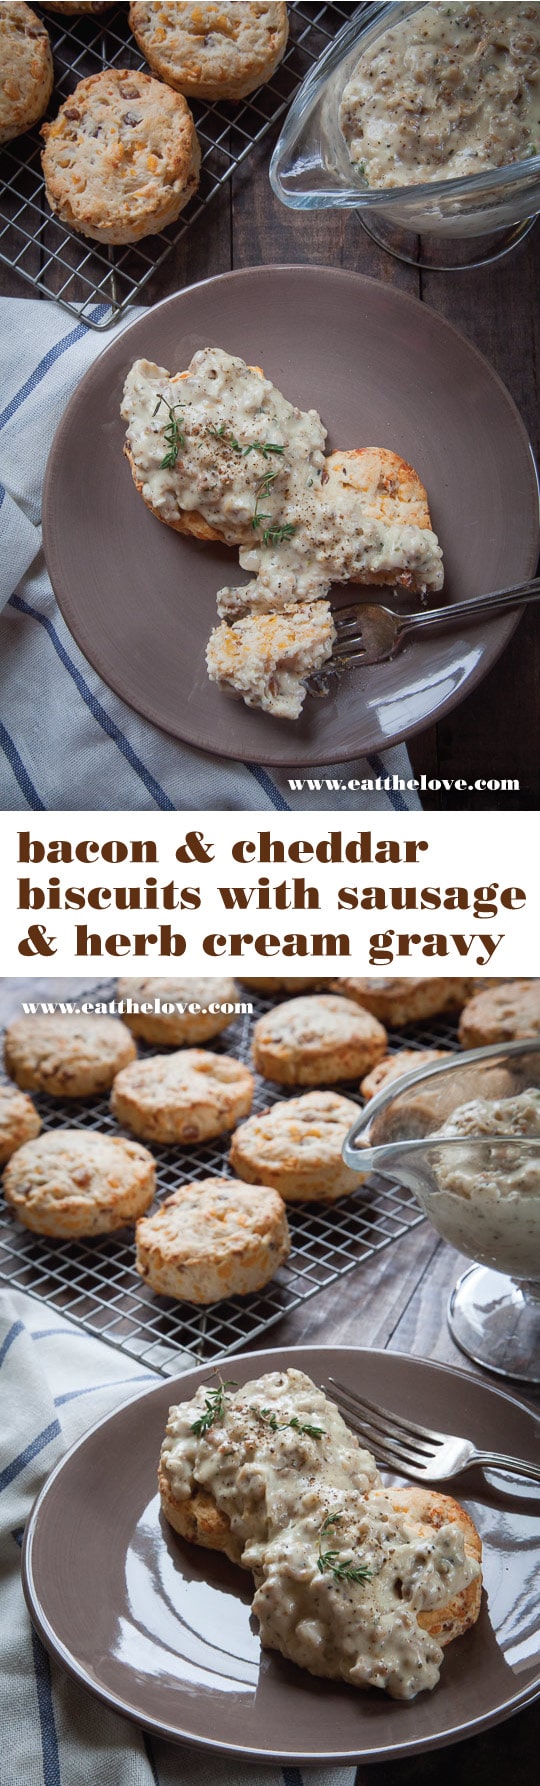 Bacon and cheddar biscuits with sausage and herb cream gravy. Recipe and photo by Irvin Lin of Eat the Love.